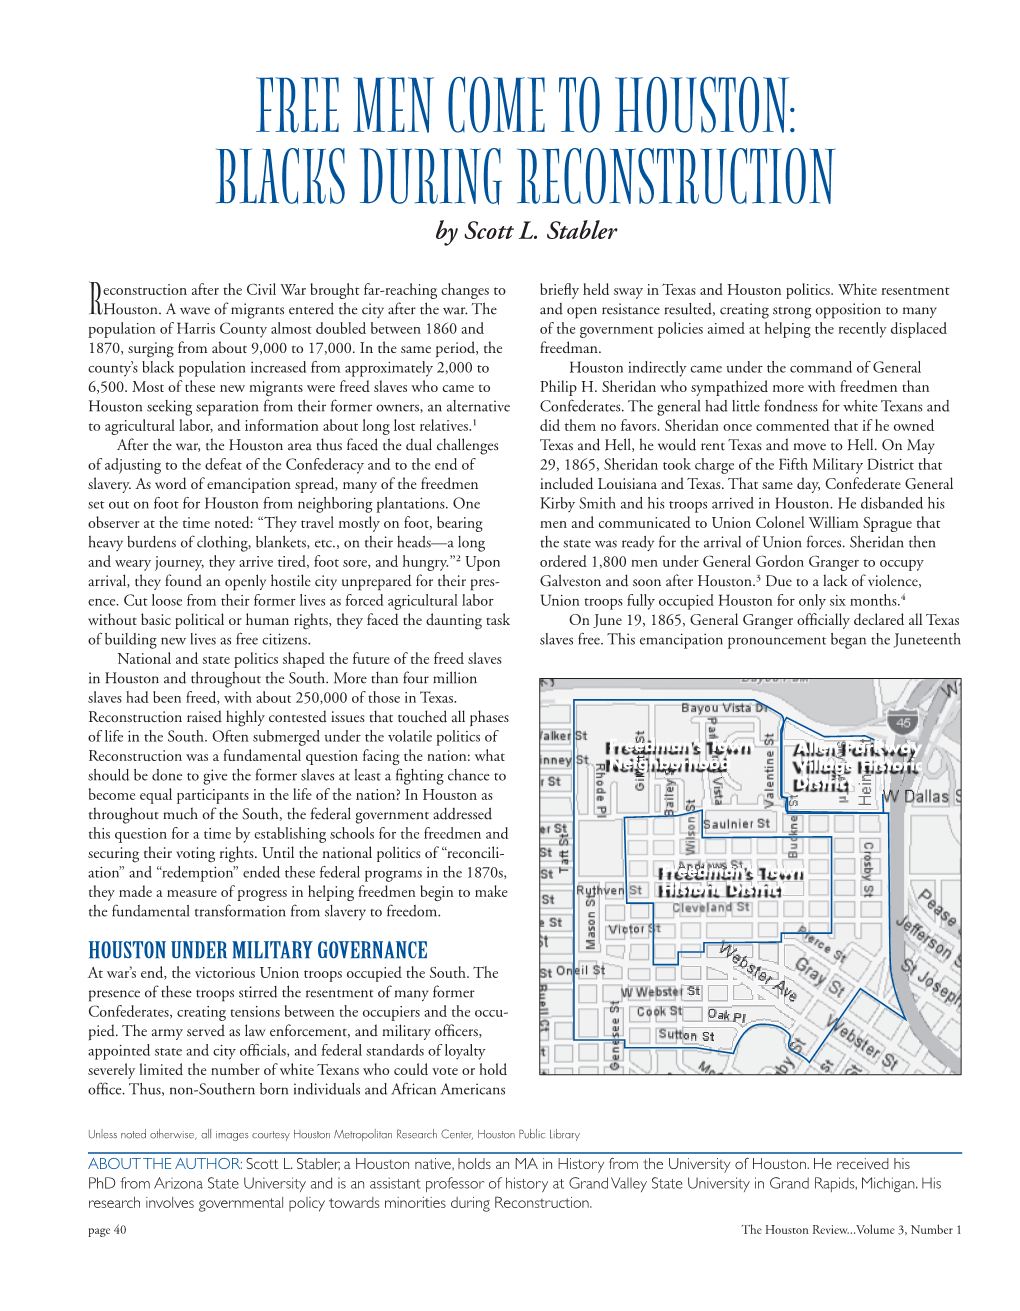 Free Men Come to Houston: Blacks During Reconstruction by Scott L